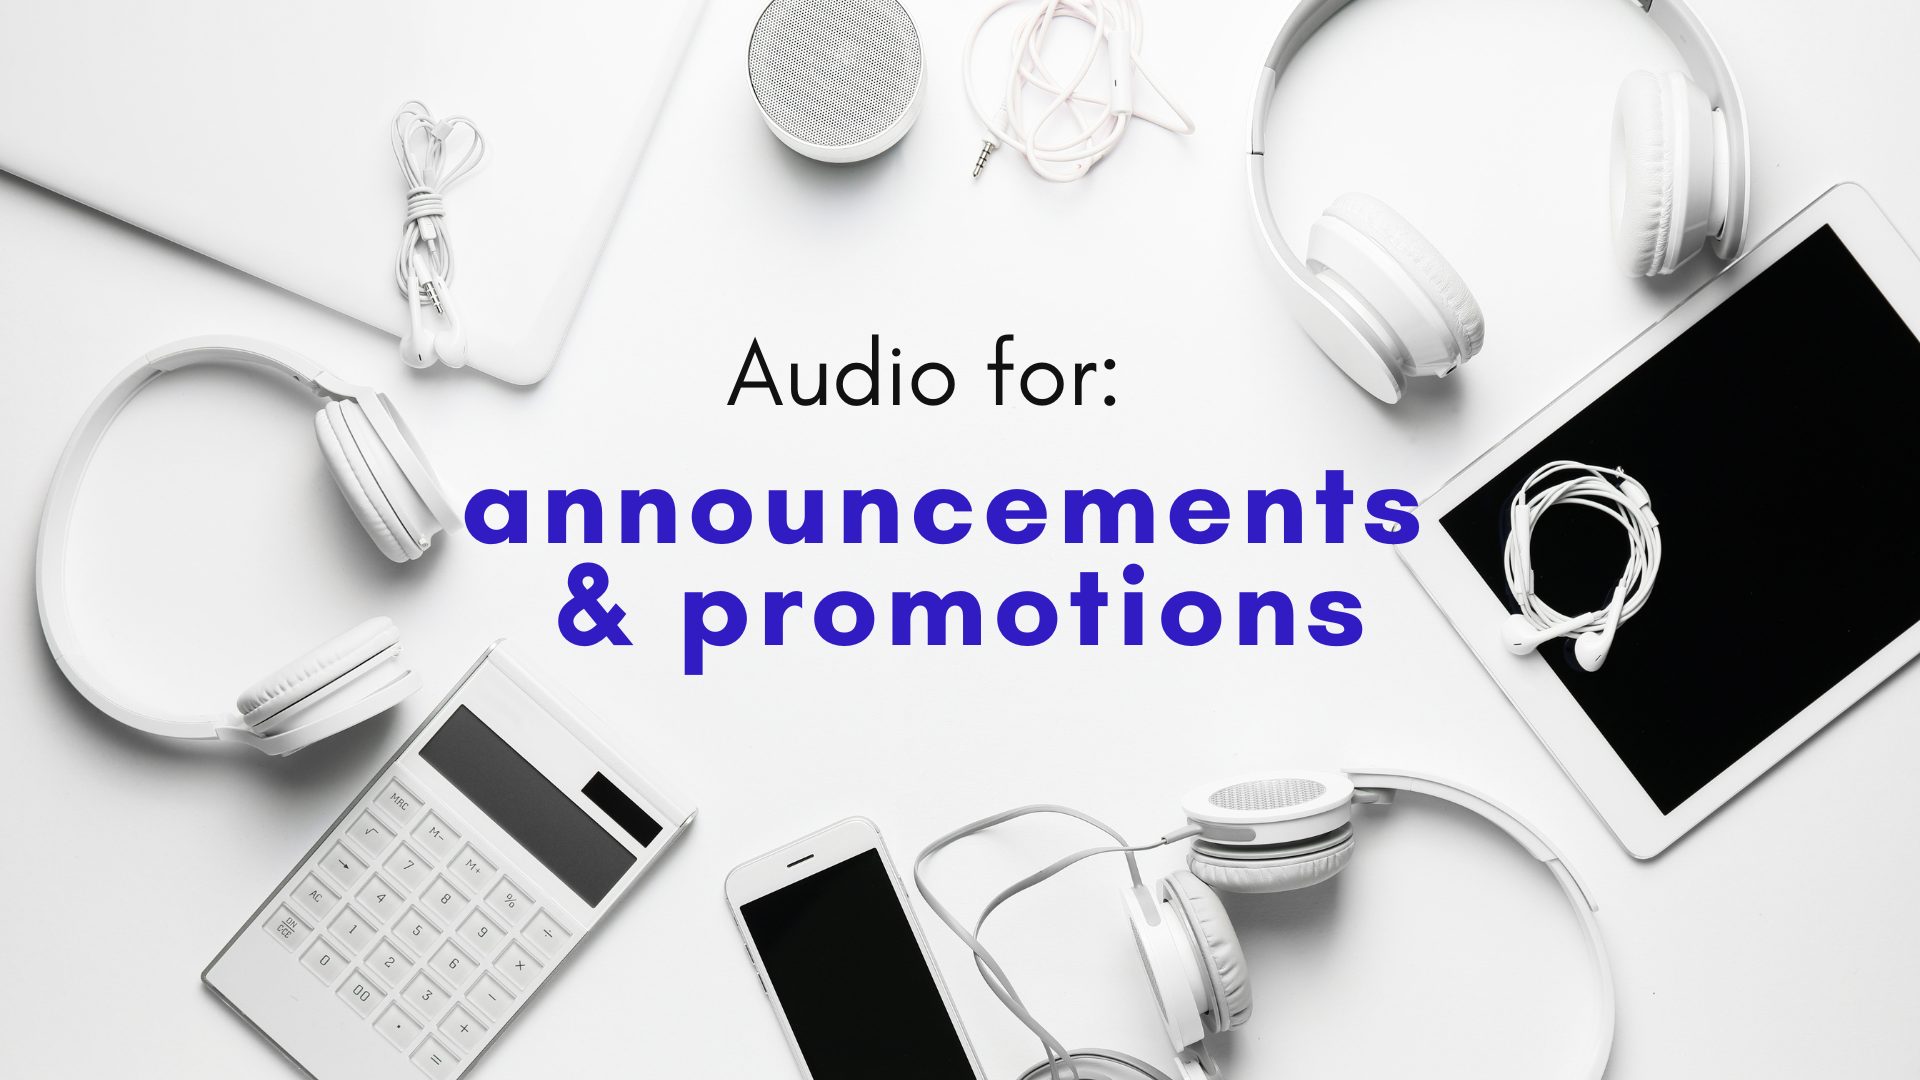 audio for annoucments and promotions